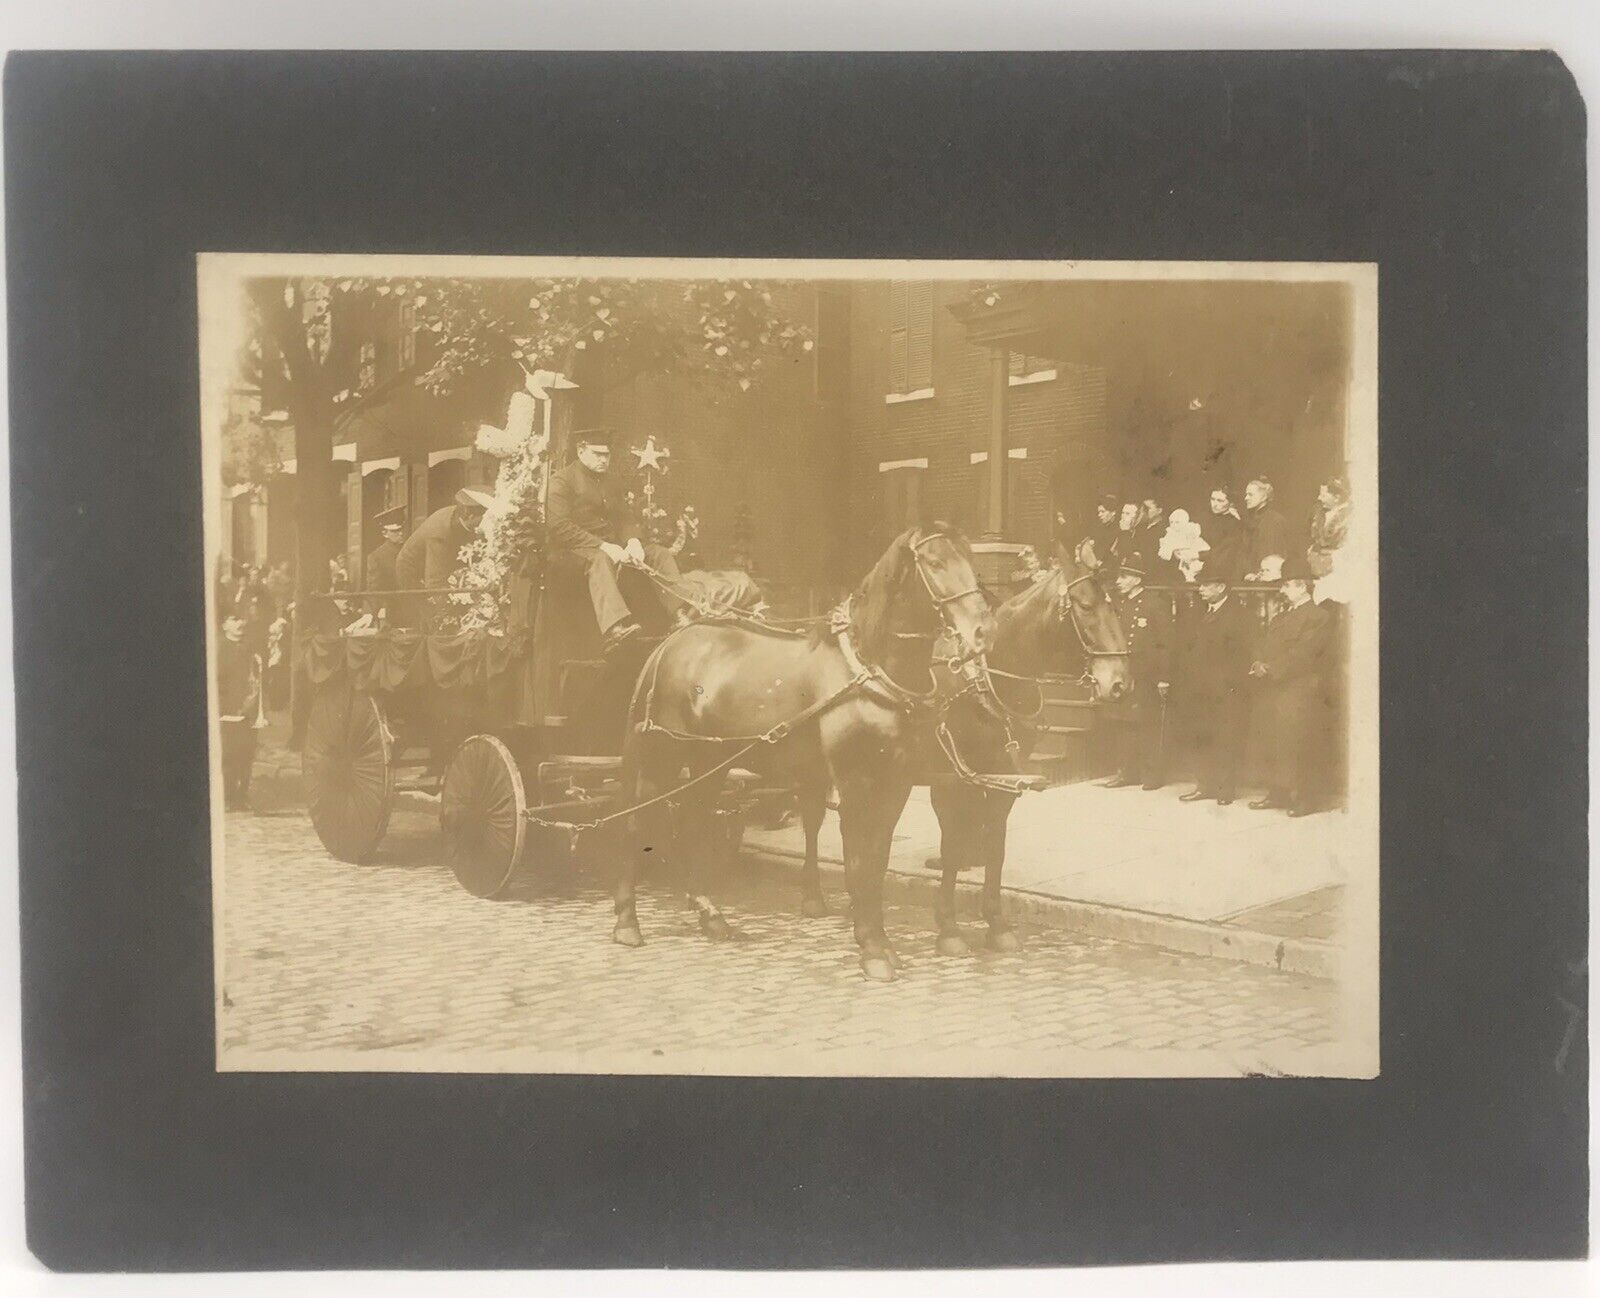 VERY UNIQUE PHOTOGRAPH OF VINTAGE POLICEMAN FUNERAL WITH HORSE CARRIAGE.